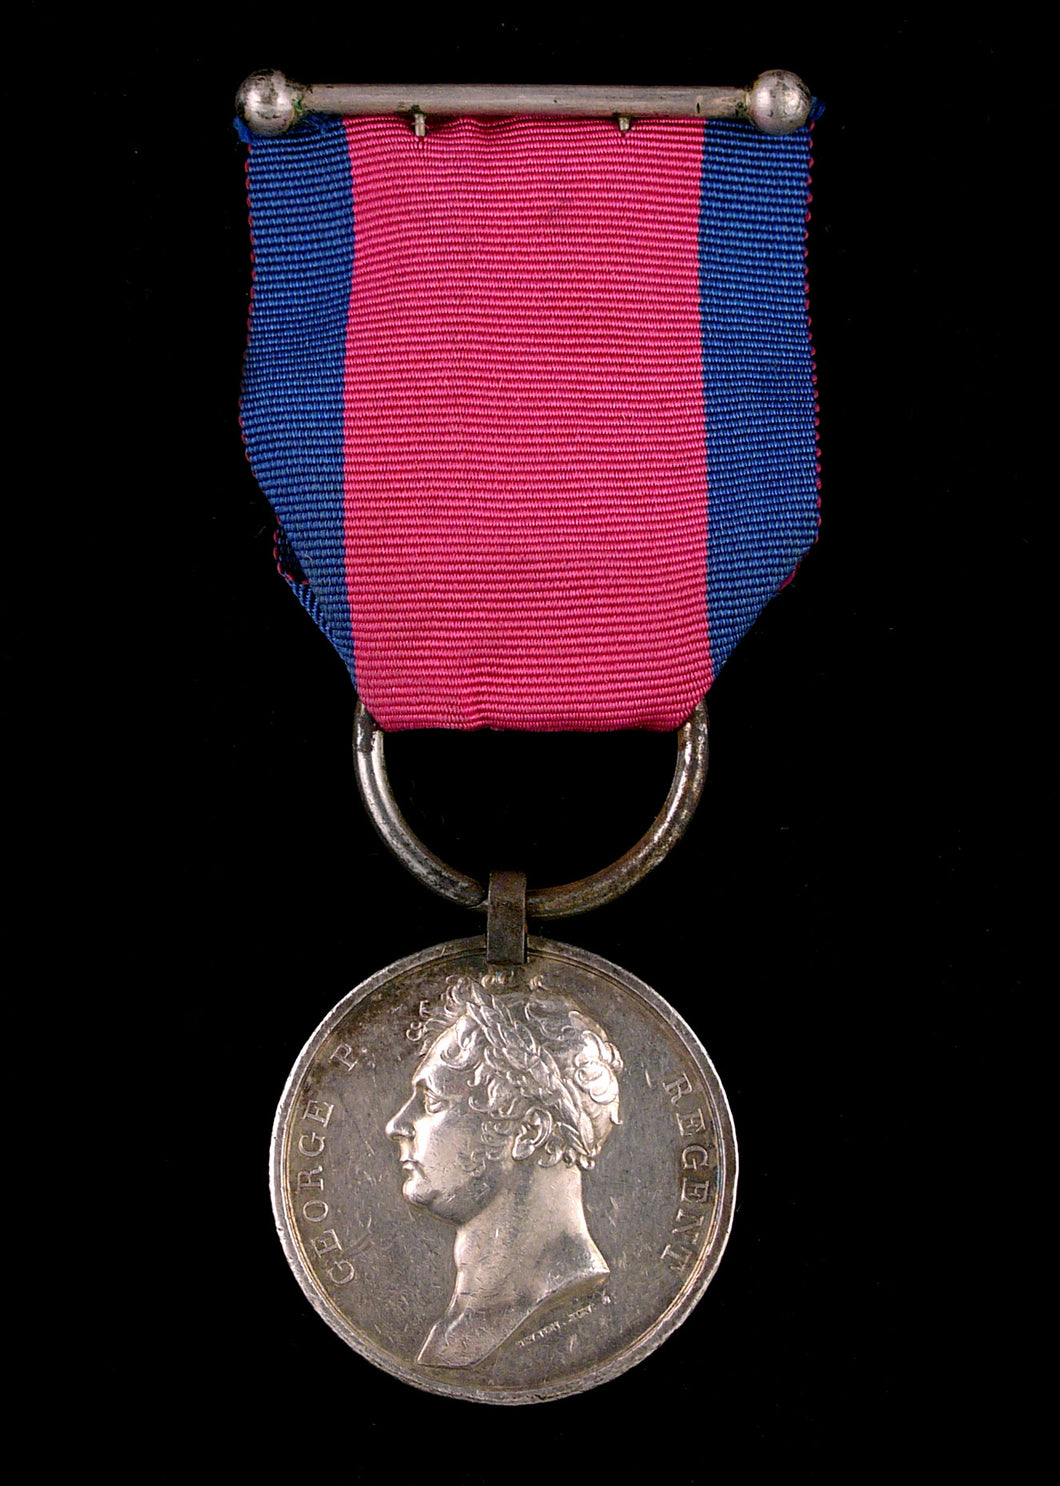 Waterloo Medal, 1815 (Ensign Charles Smith, 33rd Regiment of Foot) fitted with steel clip and ring suspension